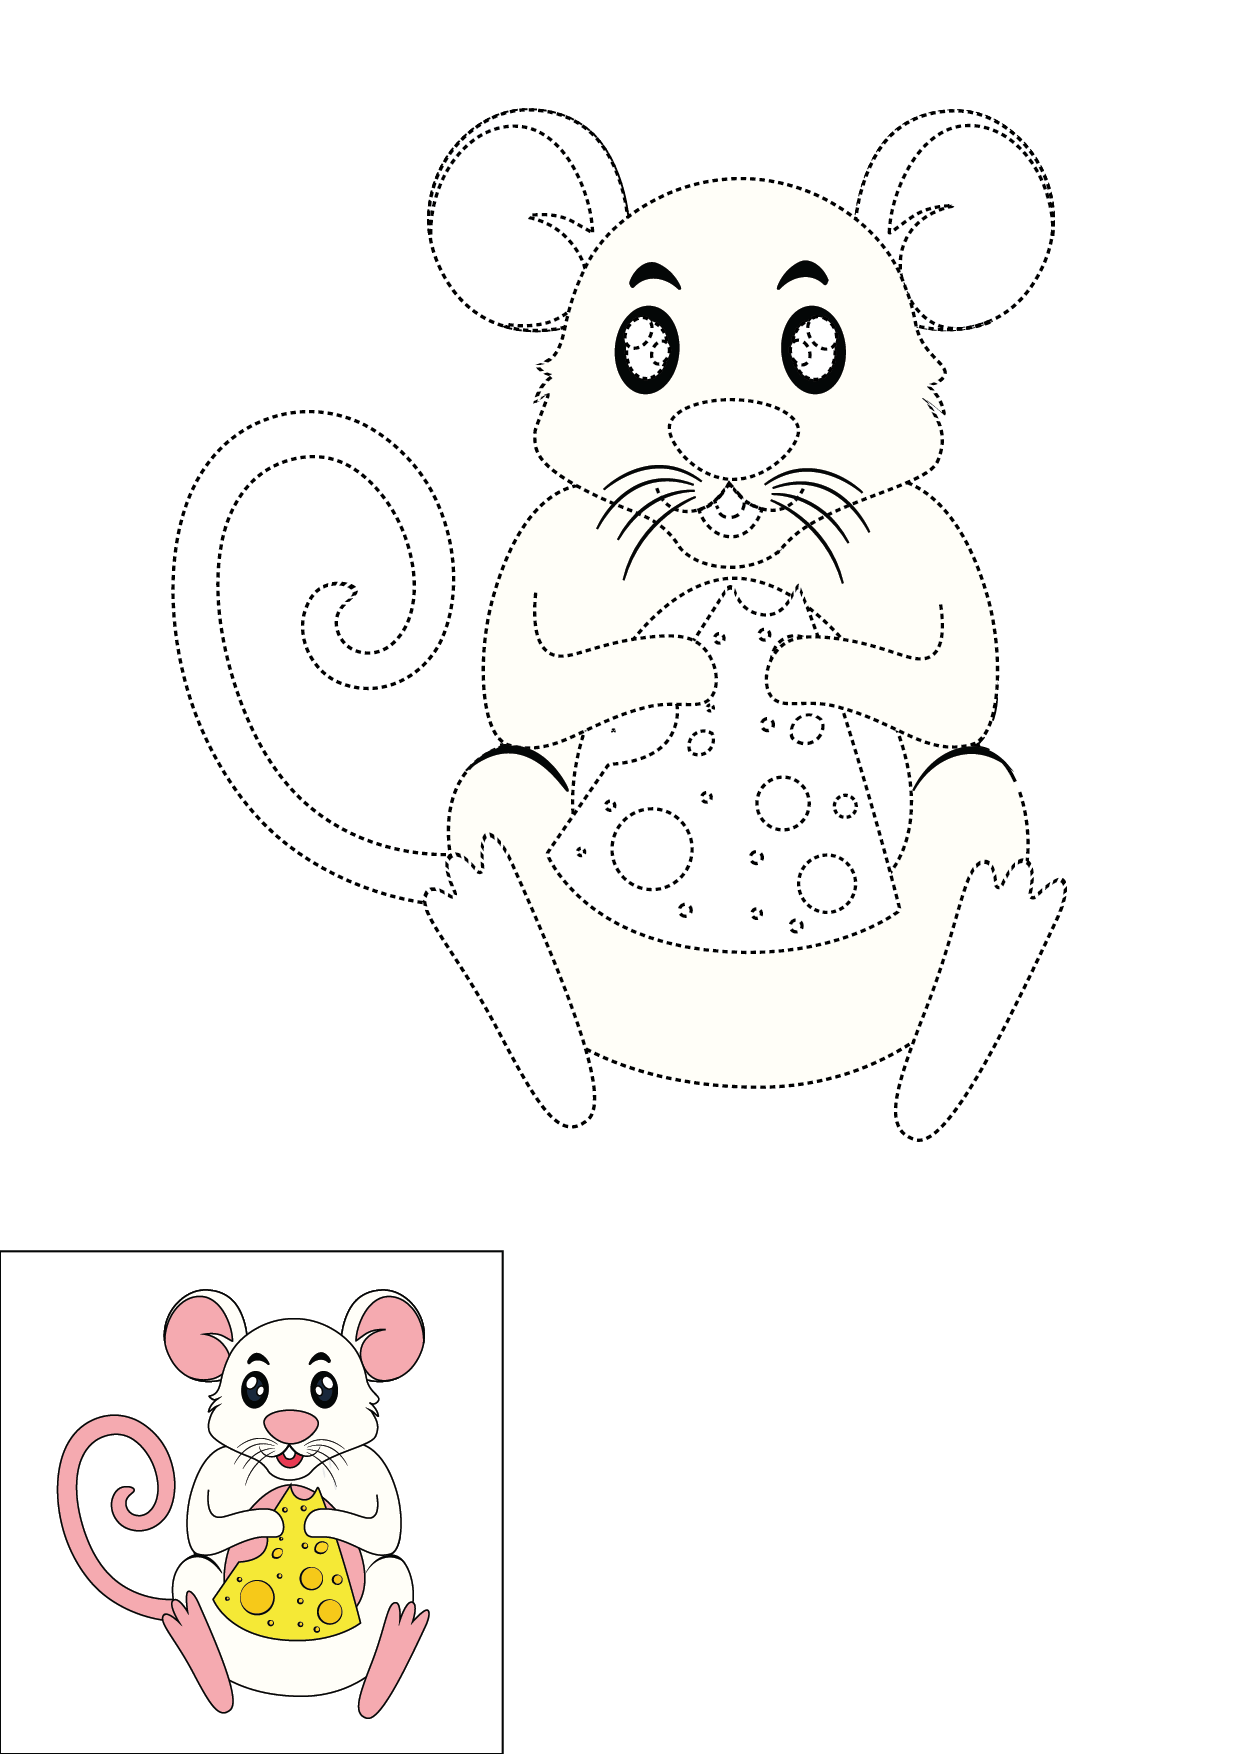 How to Draw A Rat Step by Step Printable Dotted